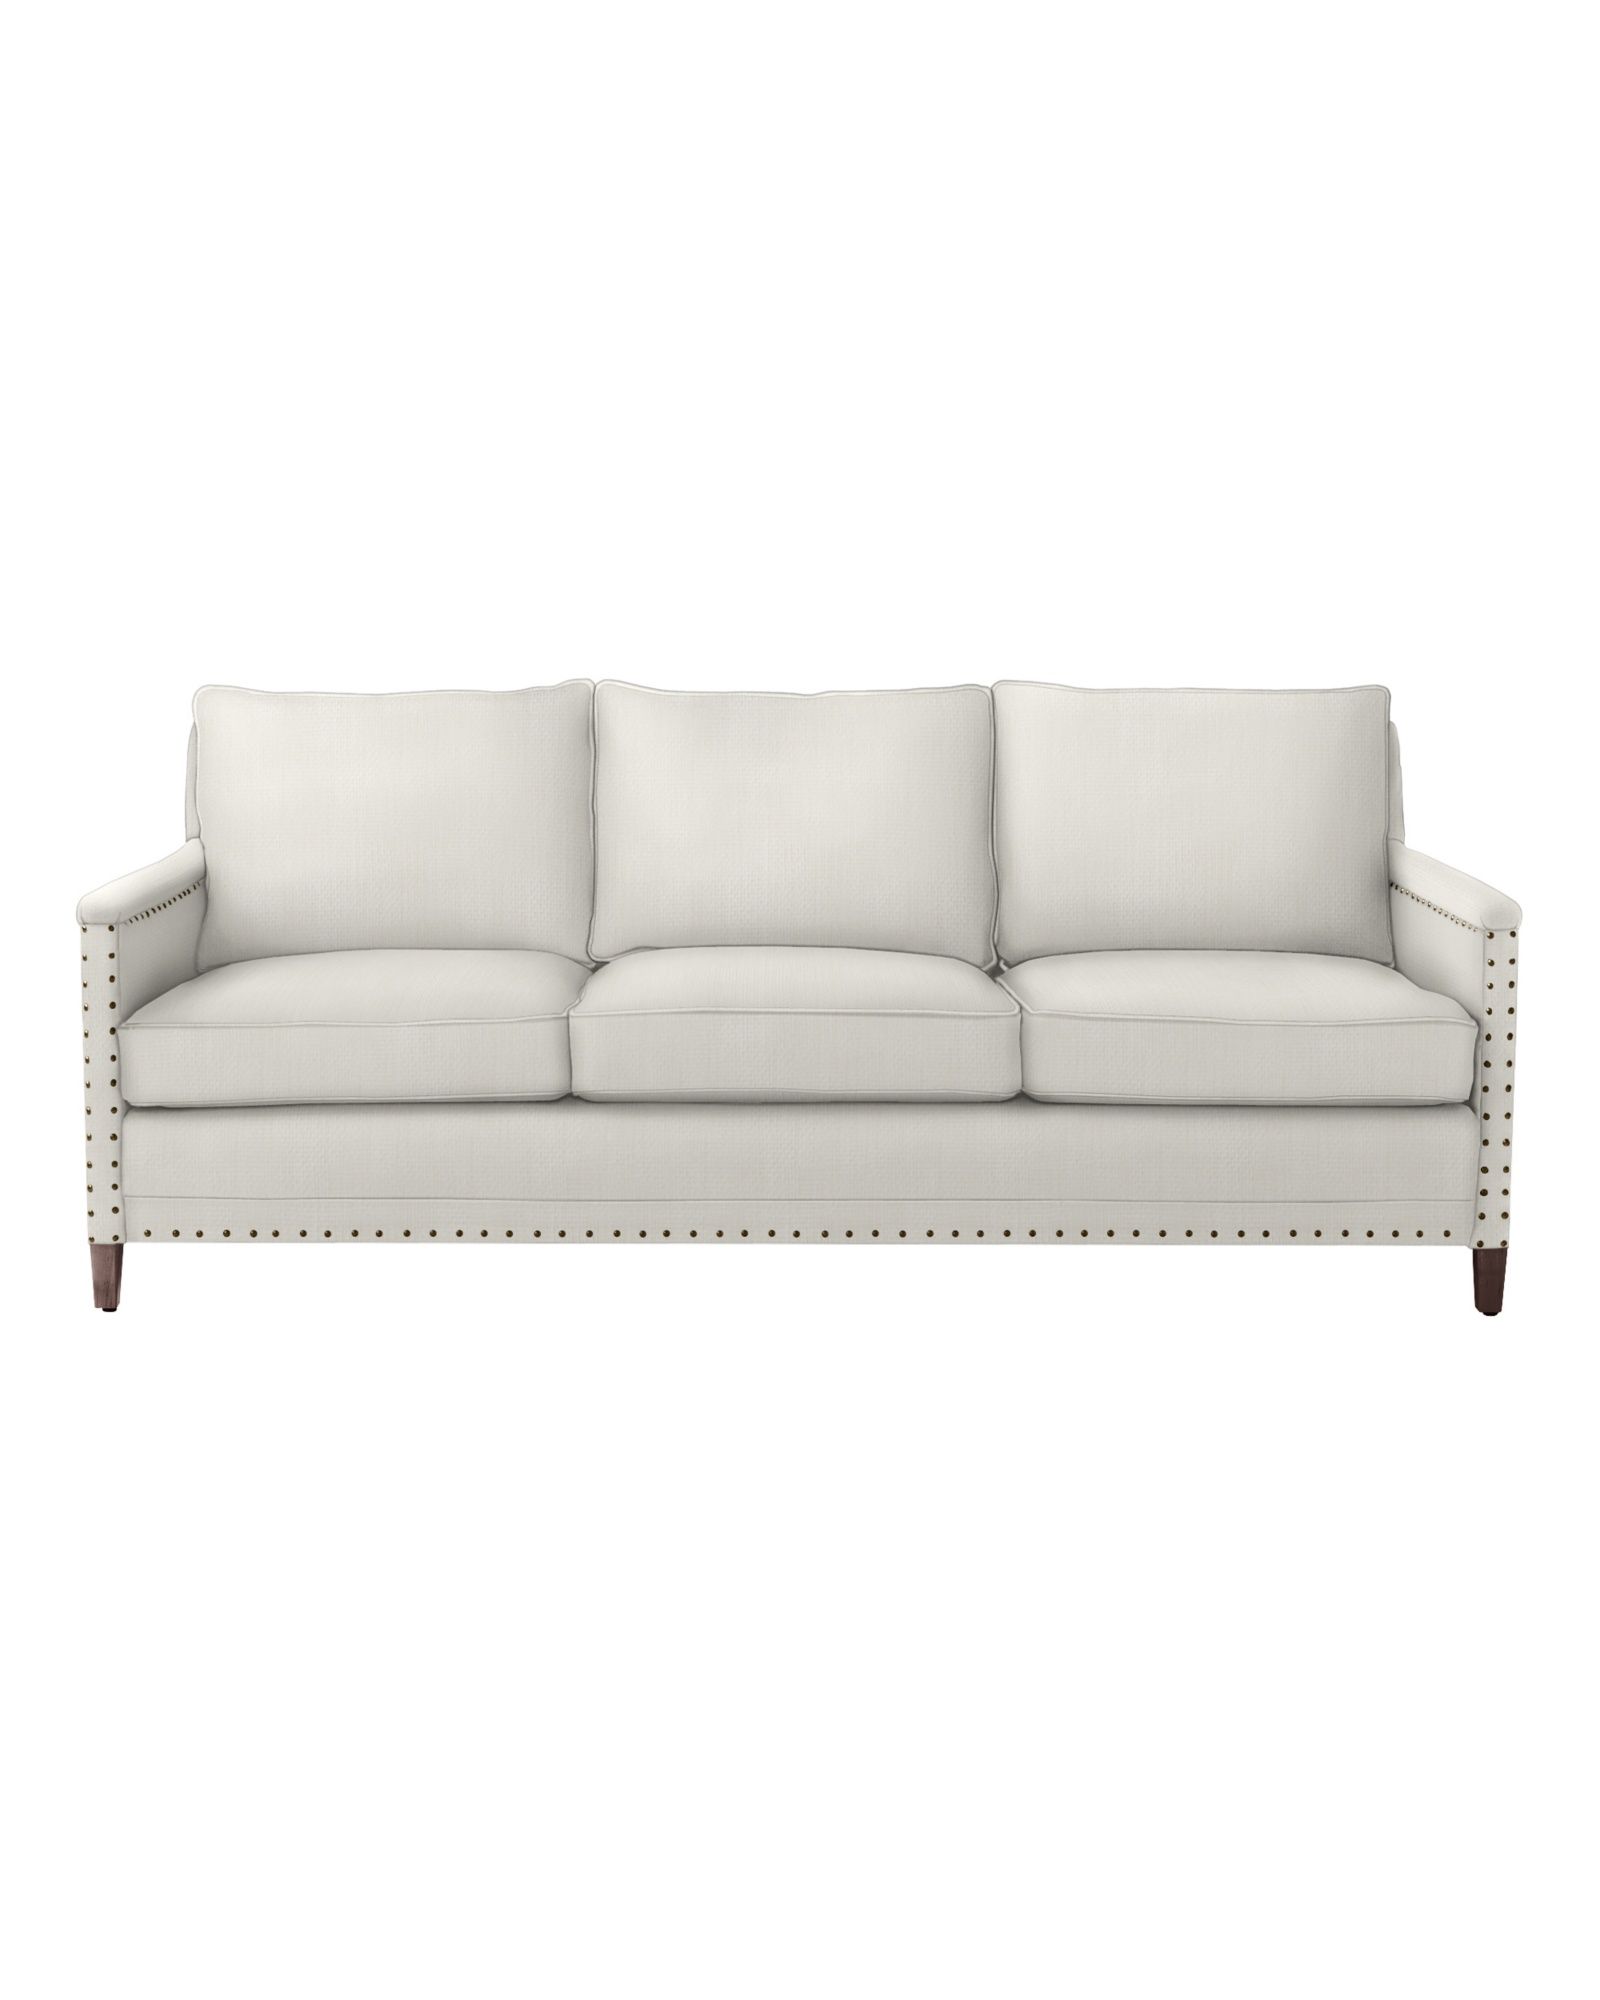 Spruce Street 3-Seat Sofa with Nailheads | Serena and Lily